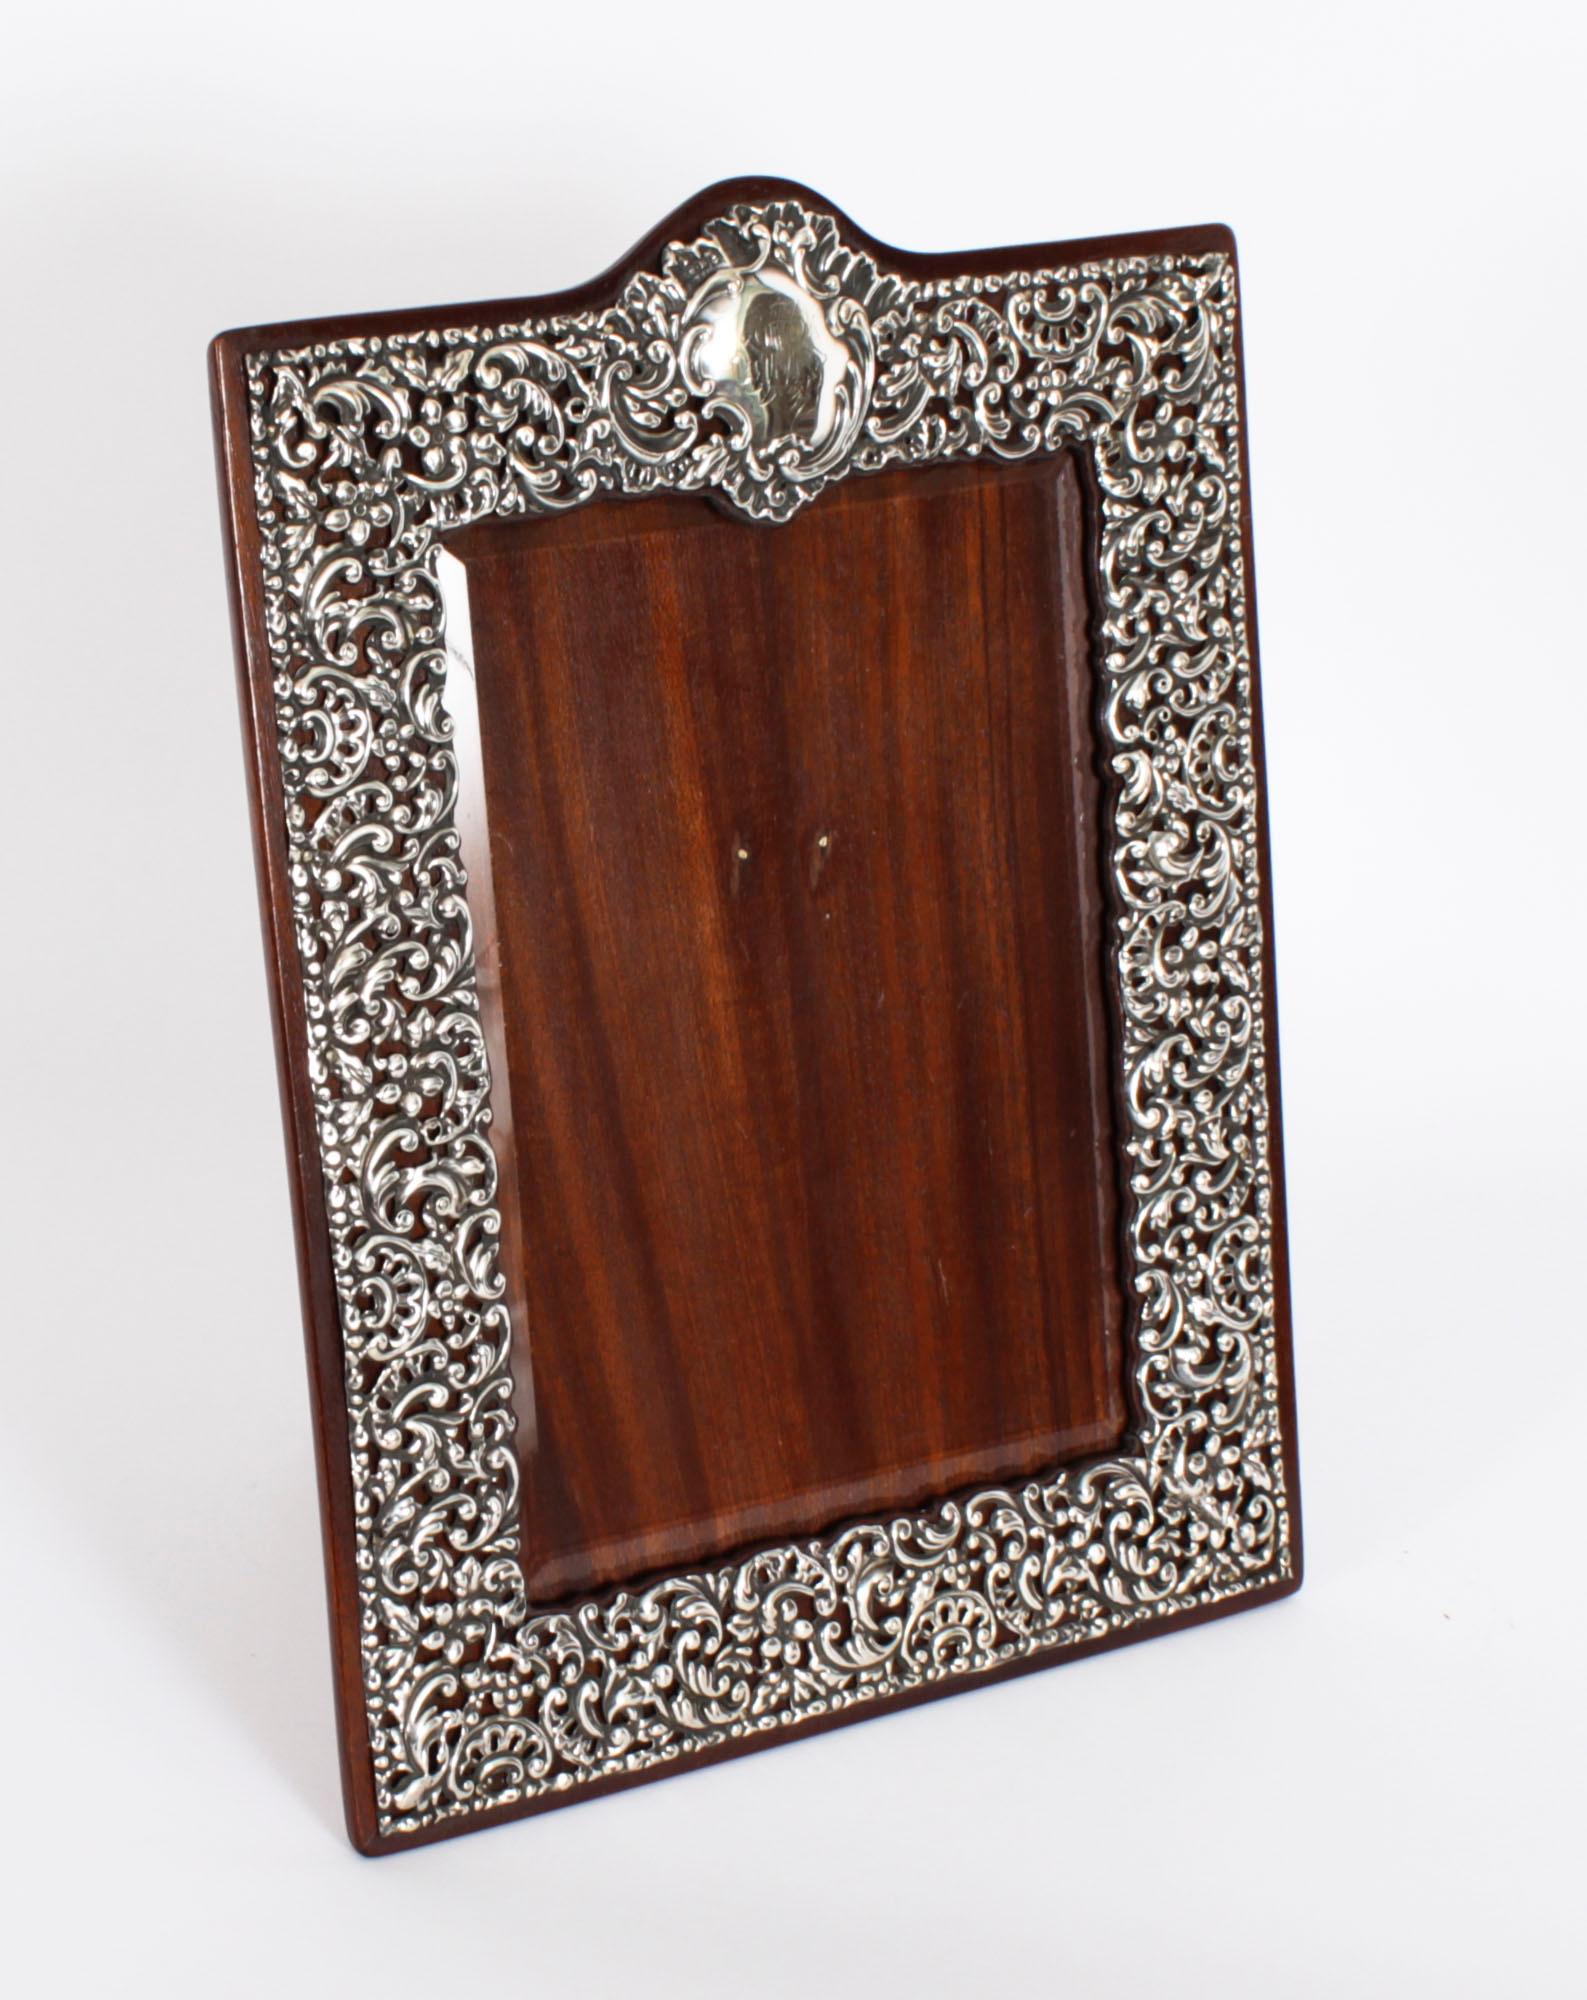 A superb Edwardian sterling silver easel photograph frame with hallmarks for Birmingham 1904.

Beautifully portrait  frame decorated with relief floral, foliate and scroll decoration, having extensive cut decoration, a plain cartouche and a polished